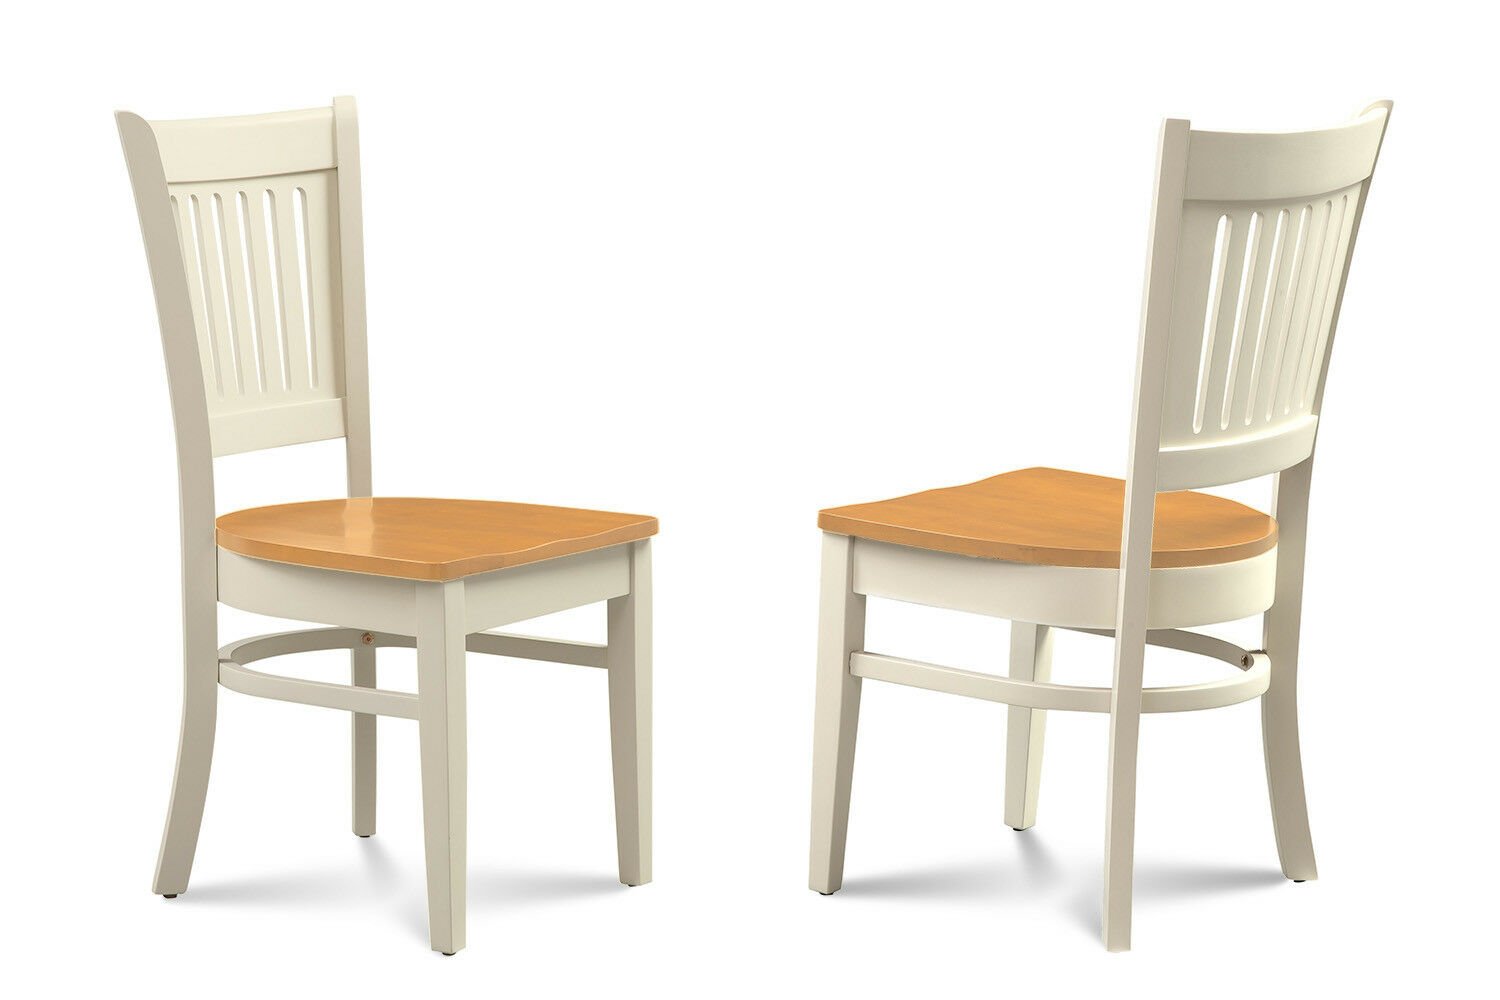 SET OF 6 DINING KITCHEN SIDE CHAIRS w/ WOOD SEATS IN TWO TONE FINISH